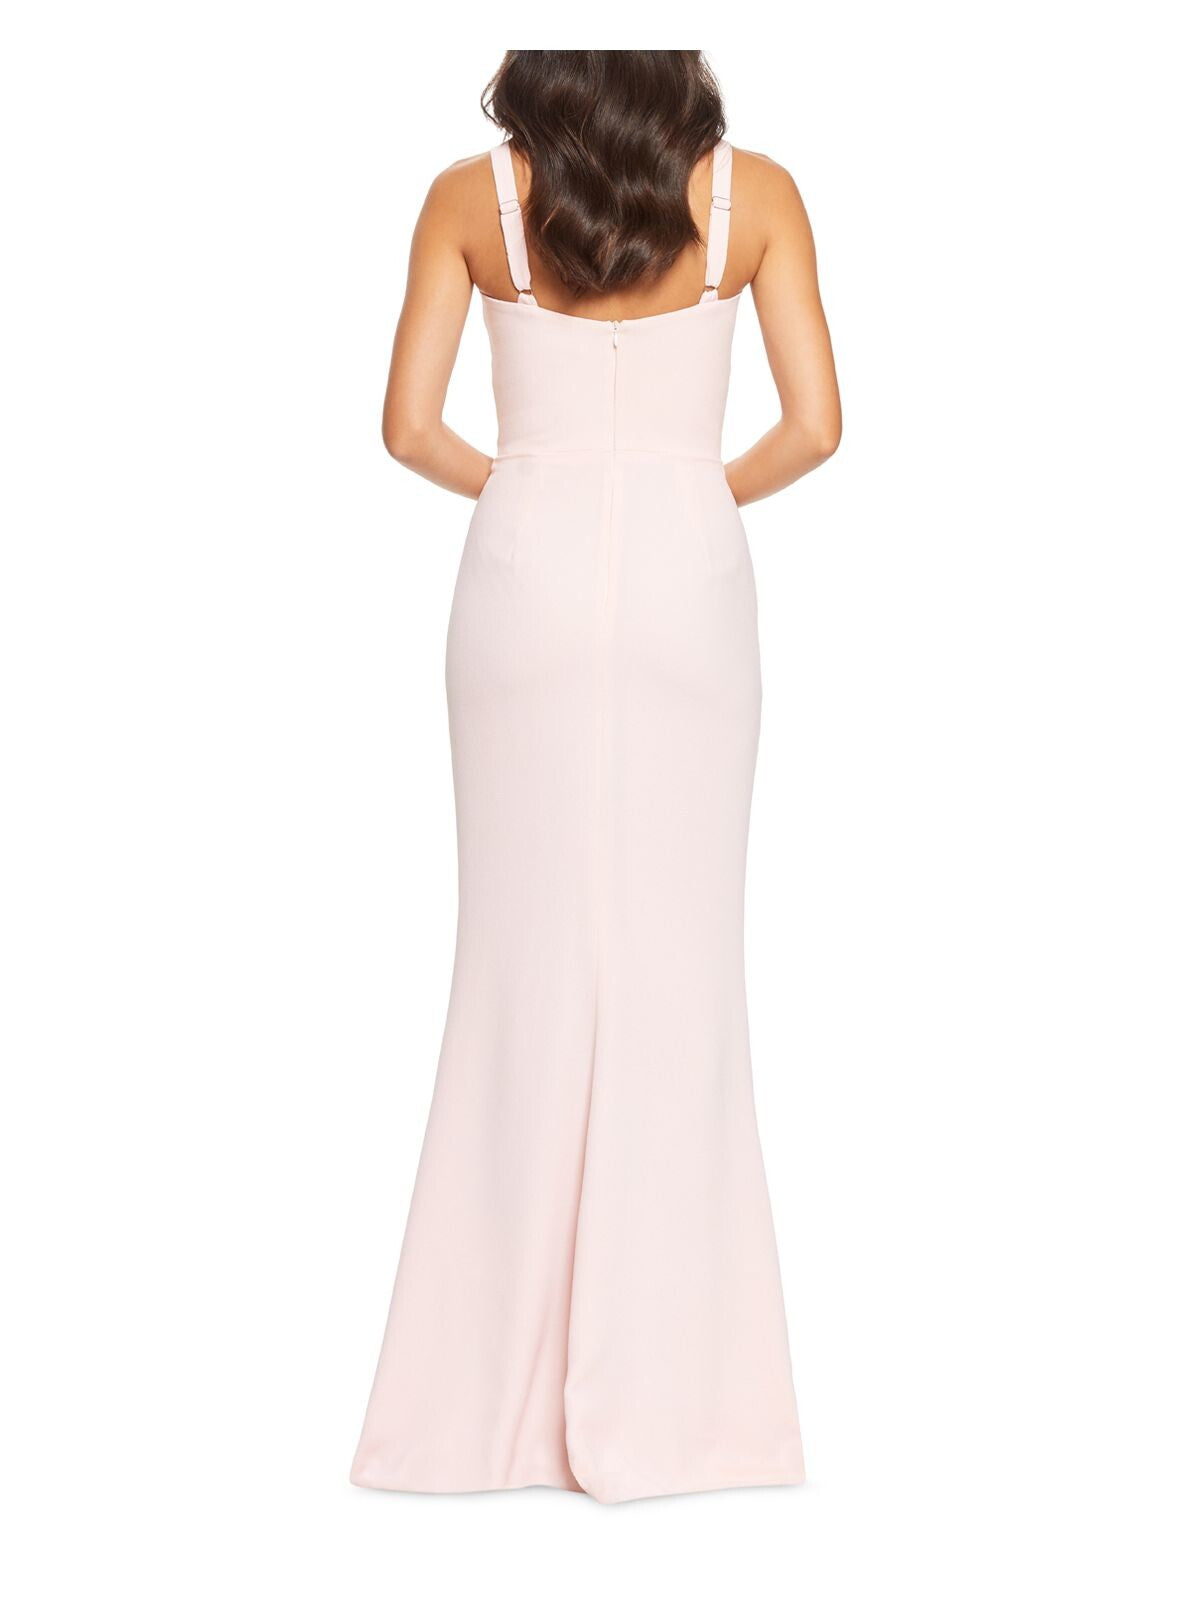 DRESS THE POPULATION Womens Pink Slitted Cut Out Front Spaghetti Strap Sweetheart Neckline Full-Length Formal Sheath Dress XS